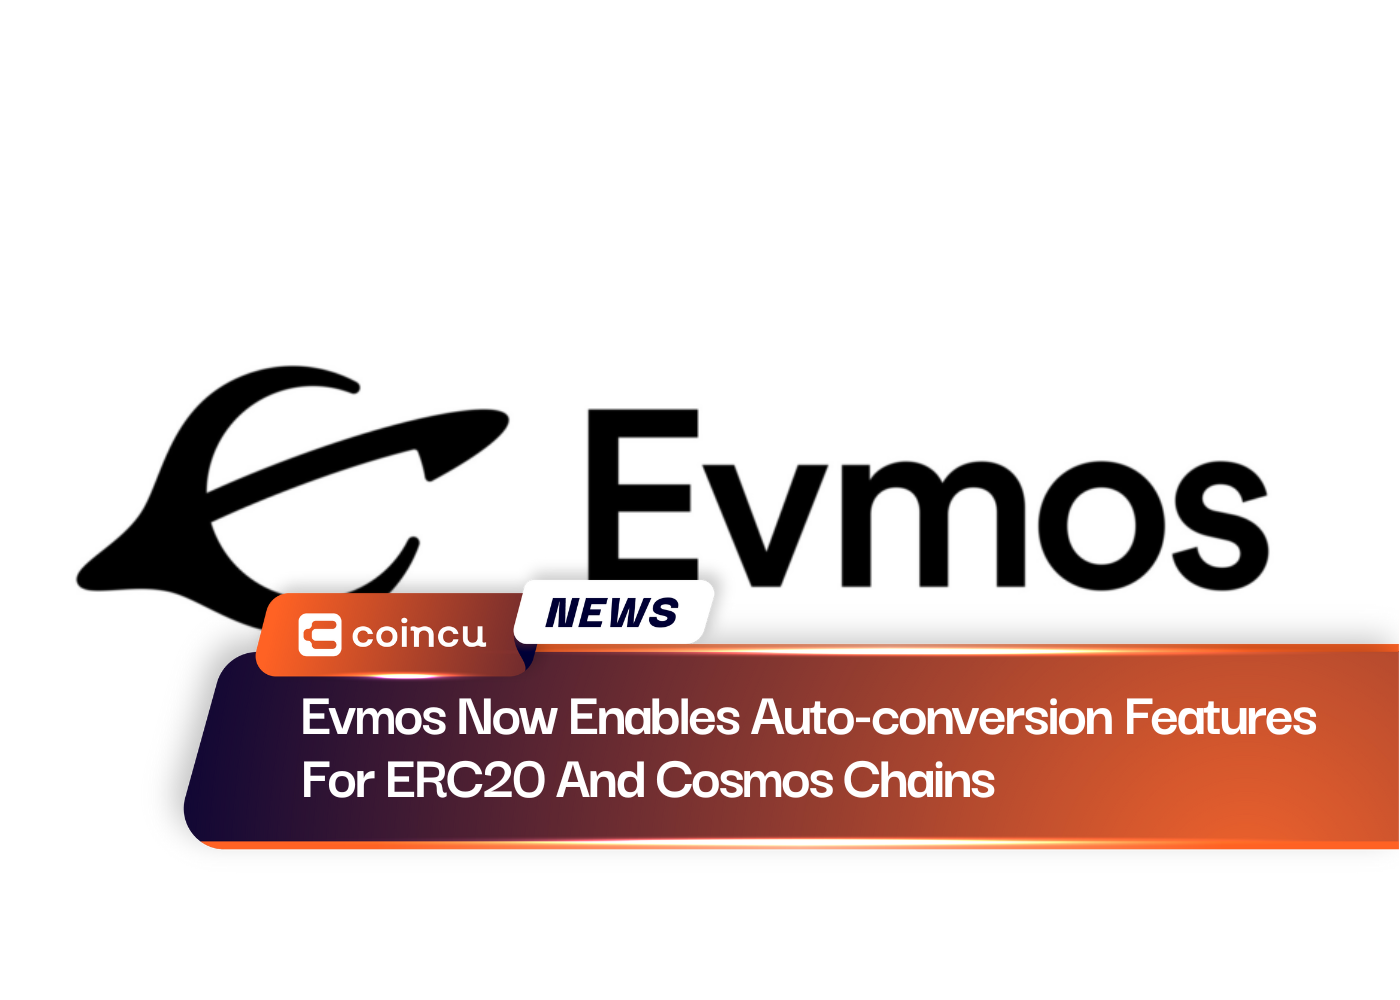 Evmos Now Enables Auto-conversion Features For ERC20 And Cosmos Chains